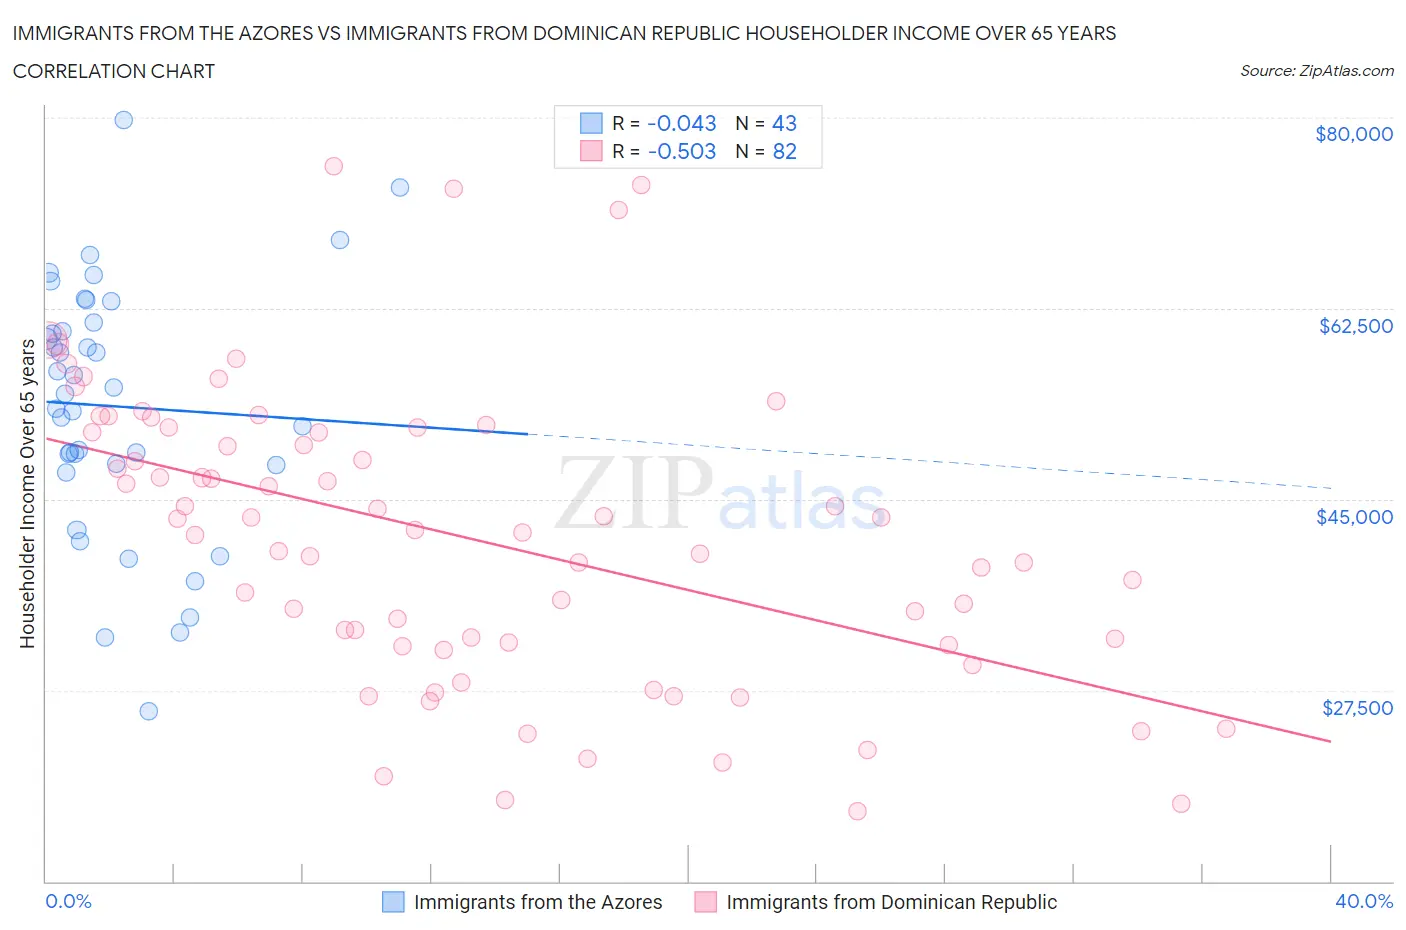 Immigrants from the Azores vs Immigrants from Dominican Republic Householder Income Over 65 years